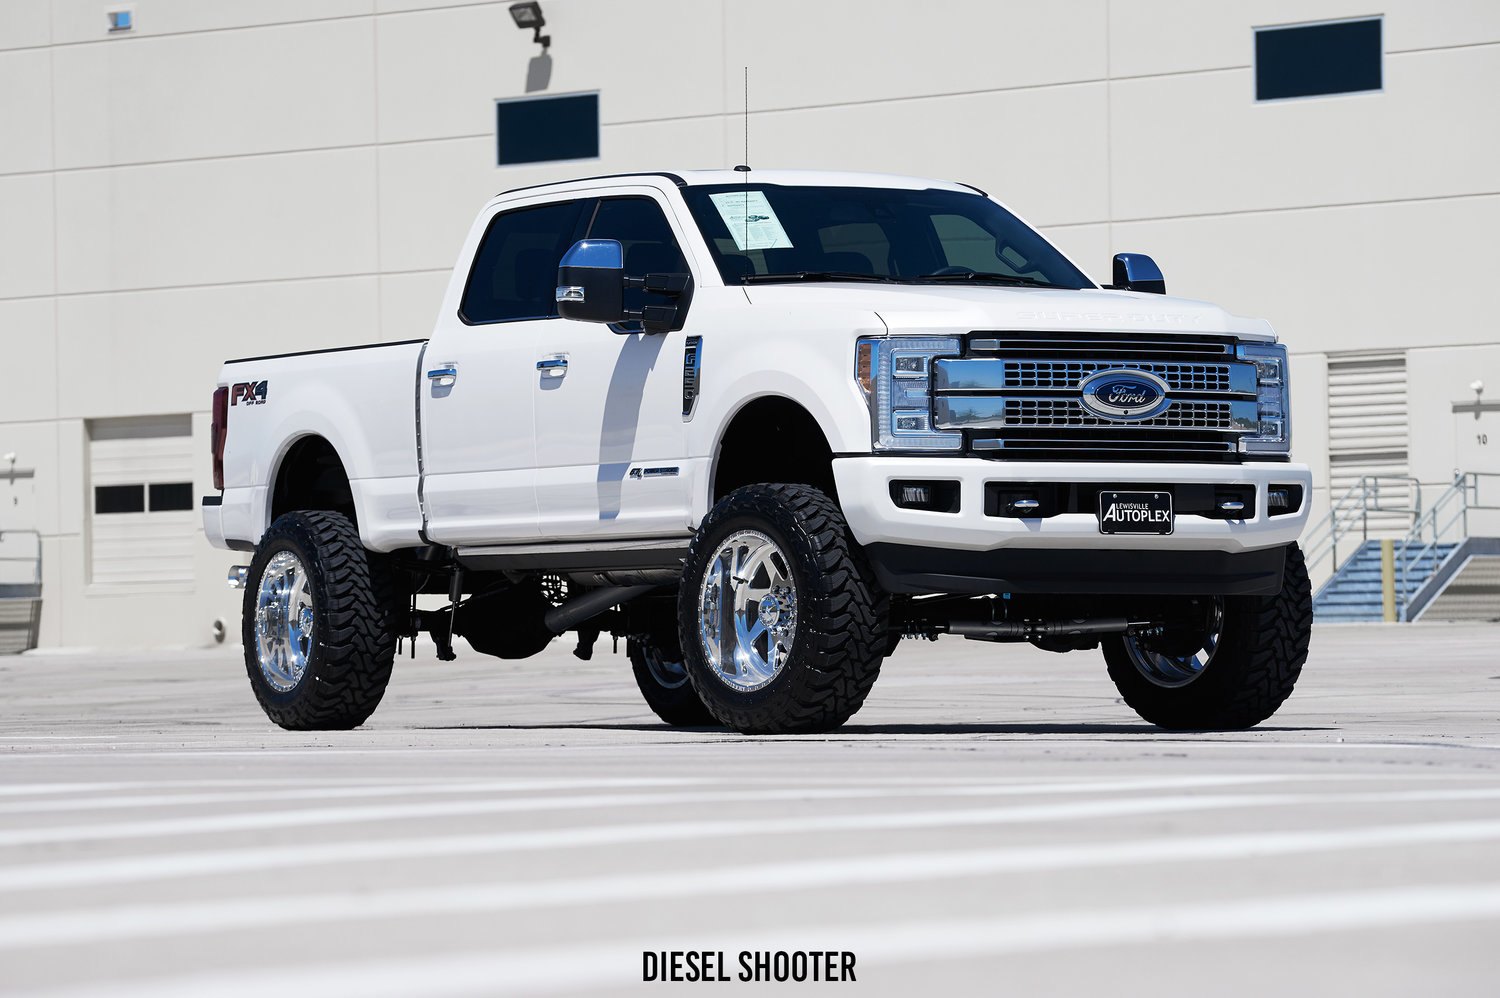 Chrome Front Bumper with Tow Hooks on Ford Super Duty - Photo by Diesel Shooter